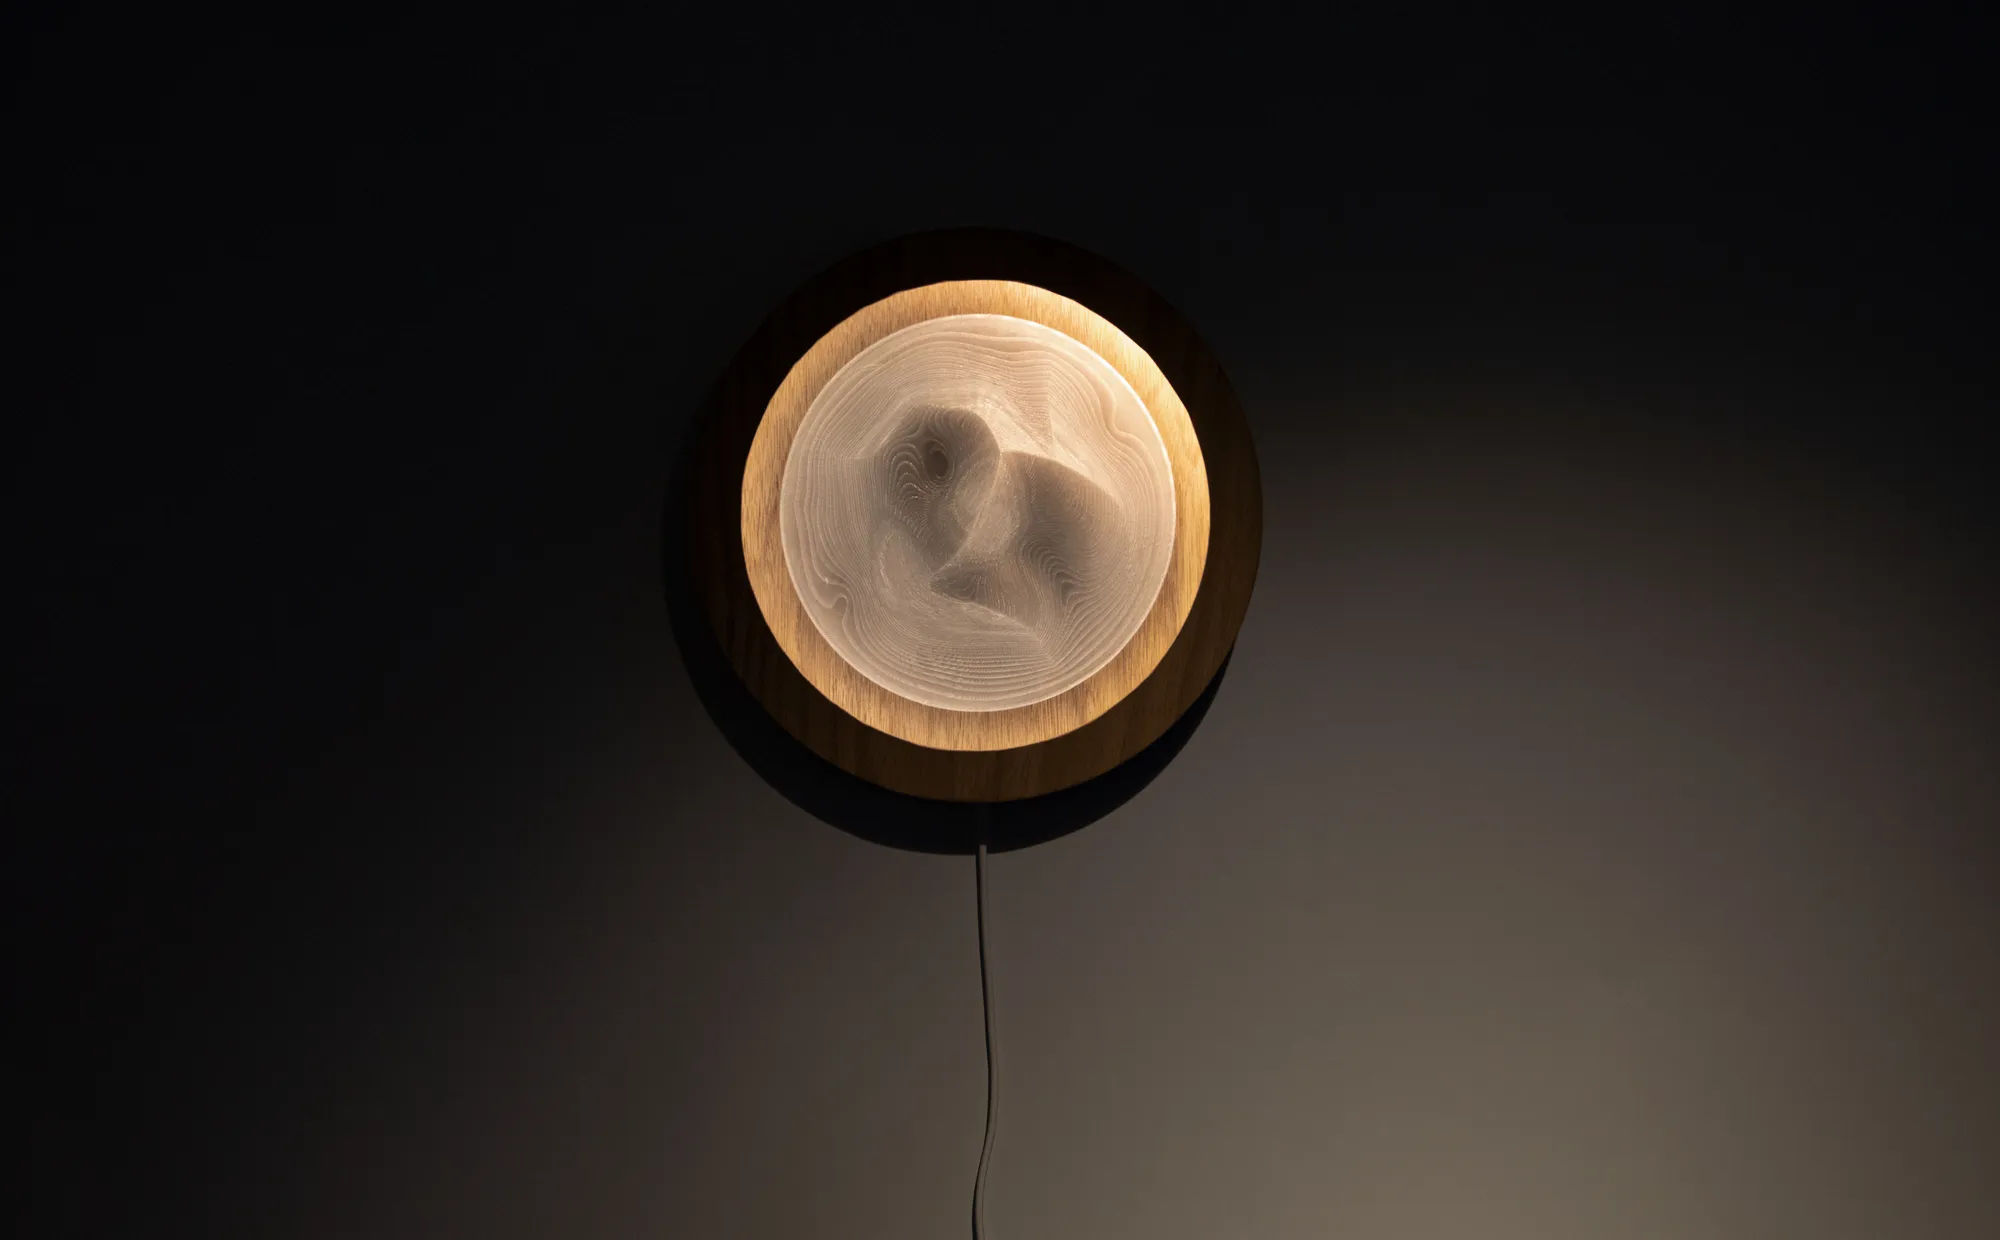 front view, round lighting fixture in a dark place, center shaped like mountains or dune